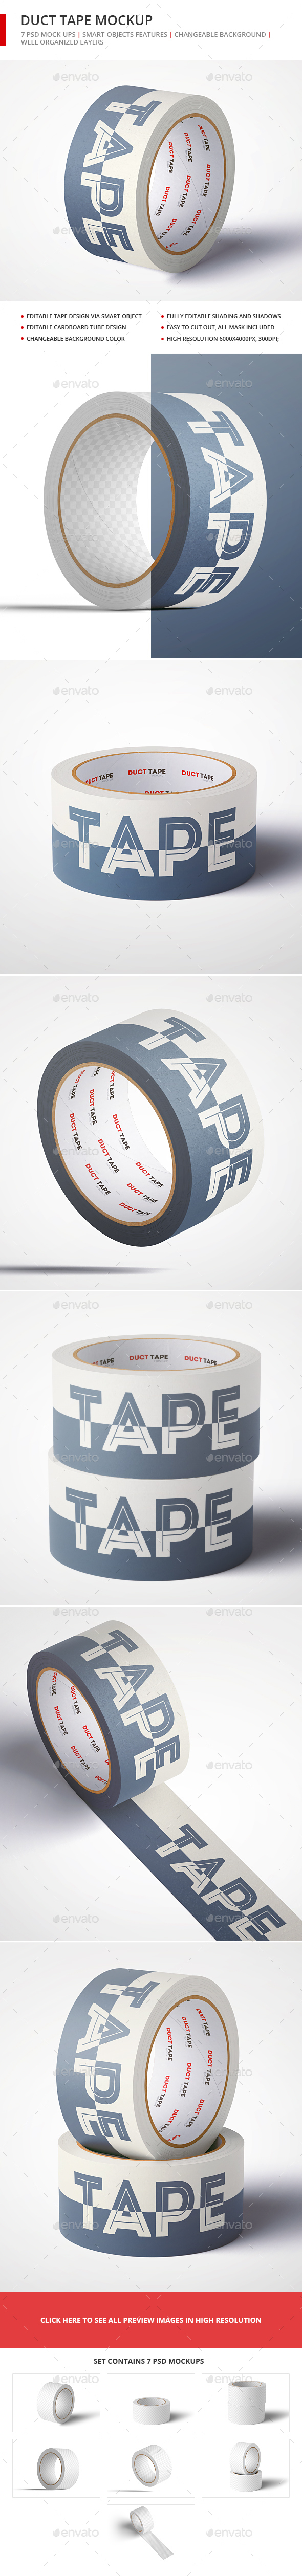 Download Duct Tape Mock Up By Webandcat Graphicriver